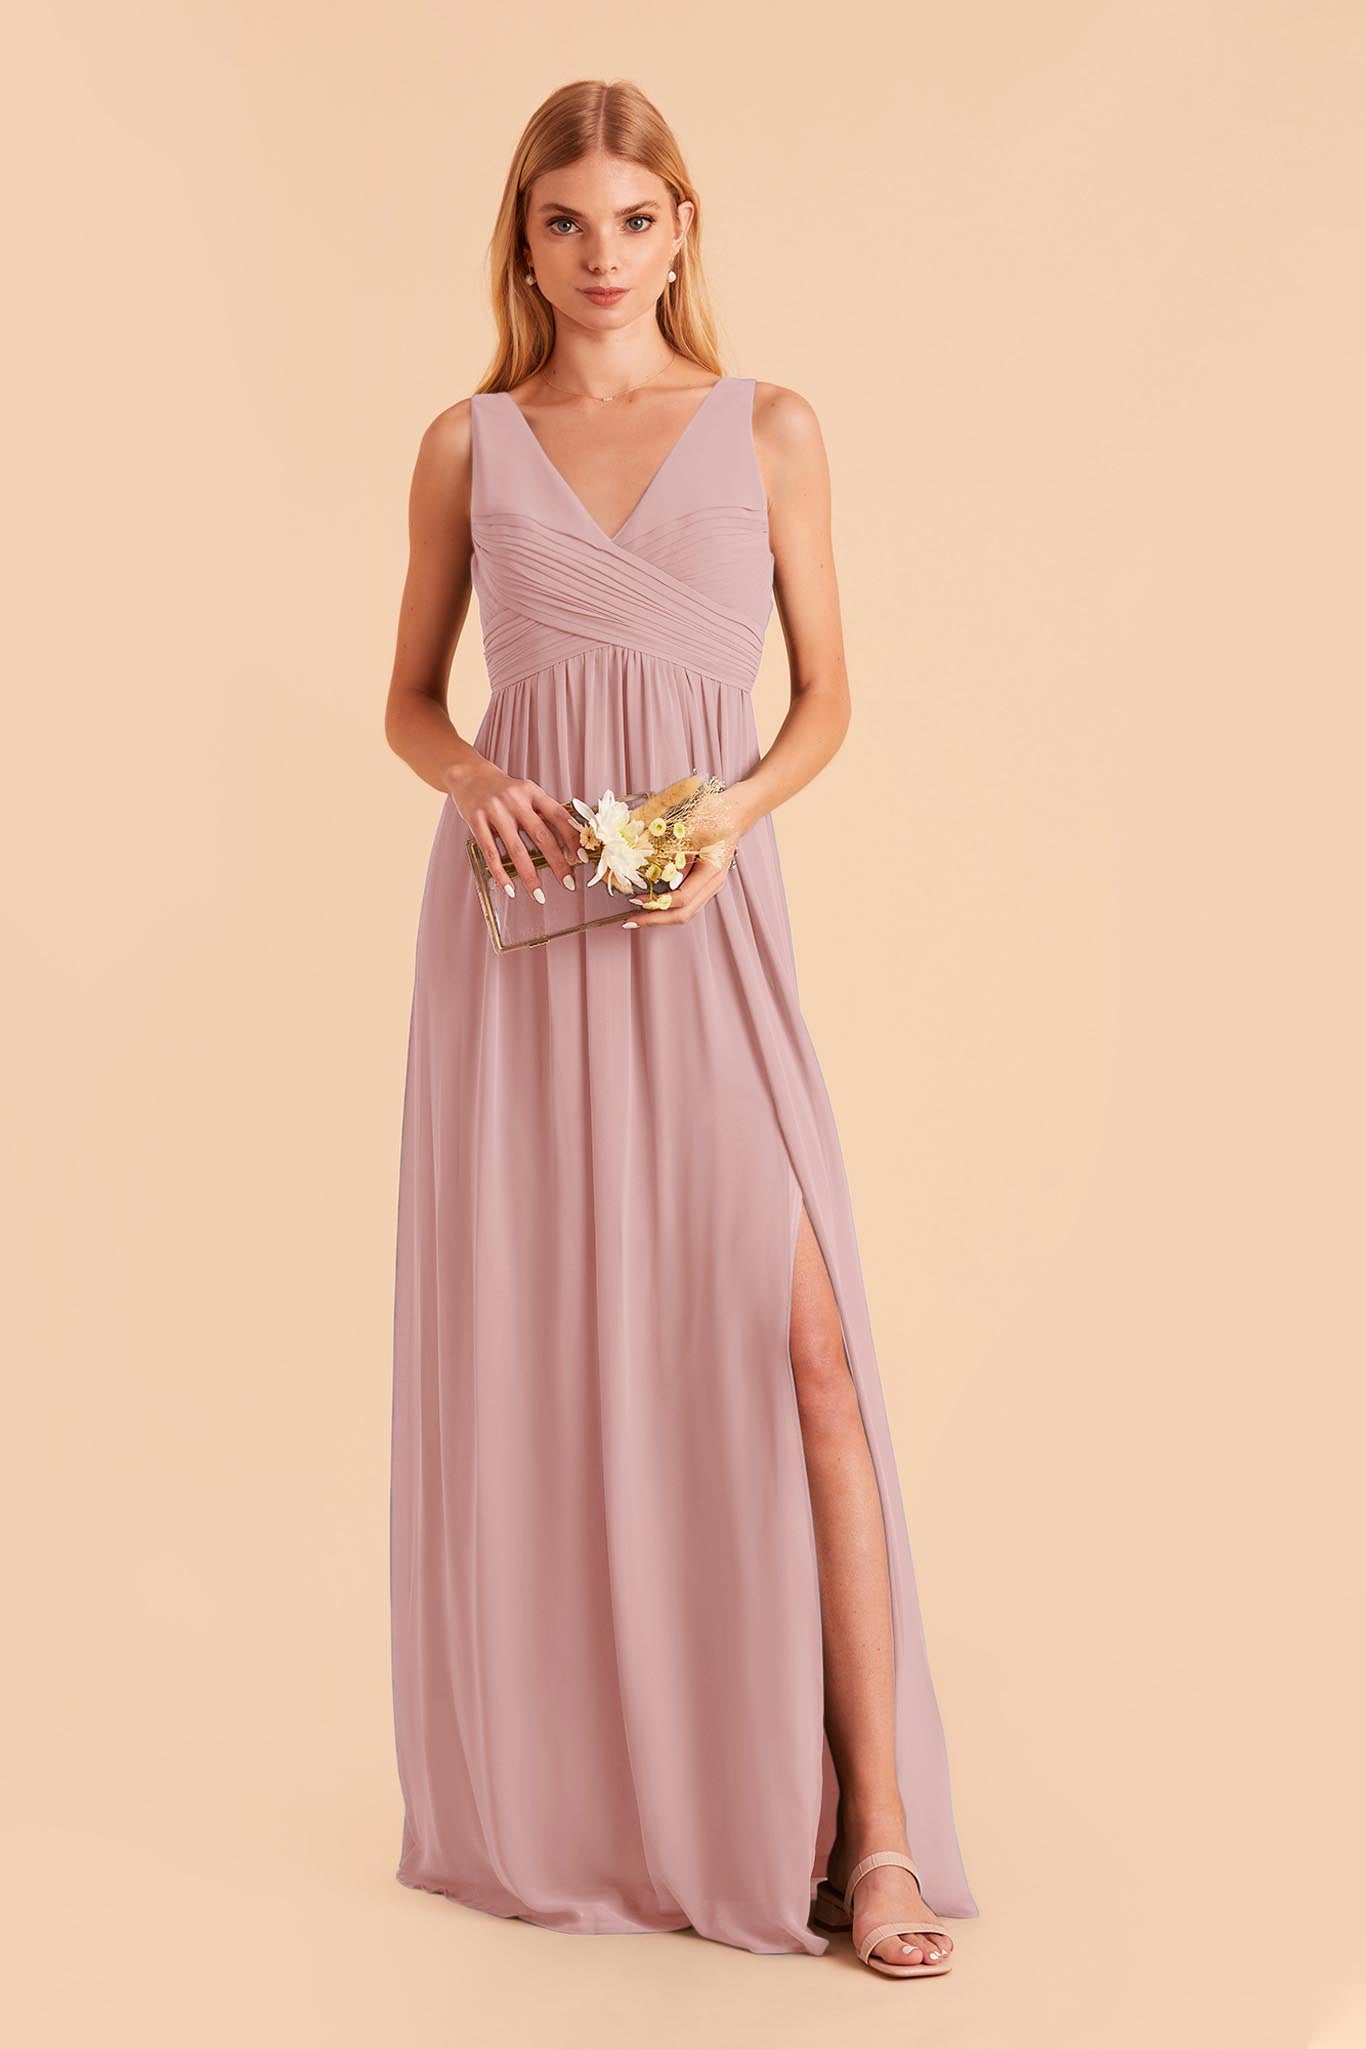 English Rose Laurie Empire Dress by Birdy Grey